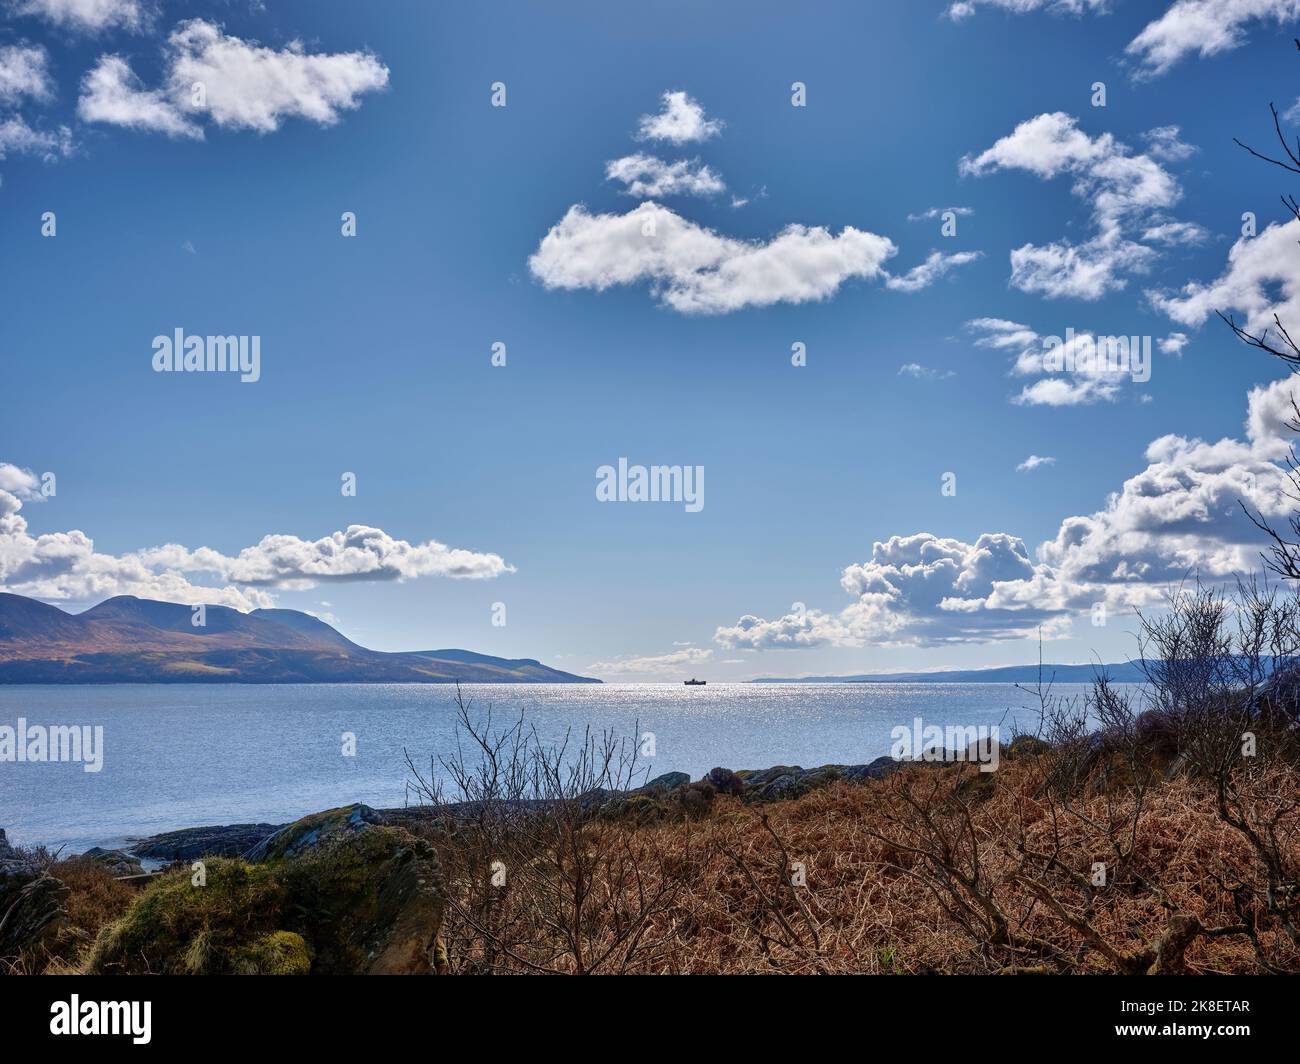 South from, the B8001 by Skipness, the ferry from Claonaig to Lochranza crosses the Kilbrannan Sound. Tarbert, Argyll and Bute. Scotland Stock Photo